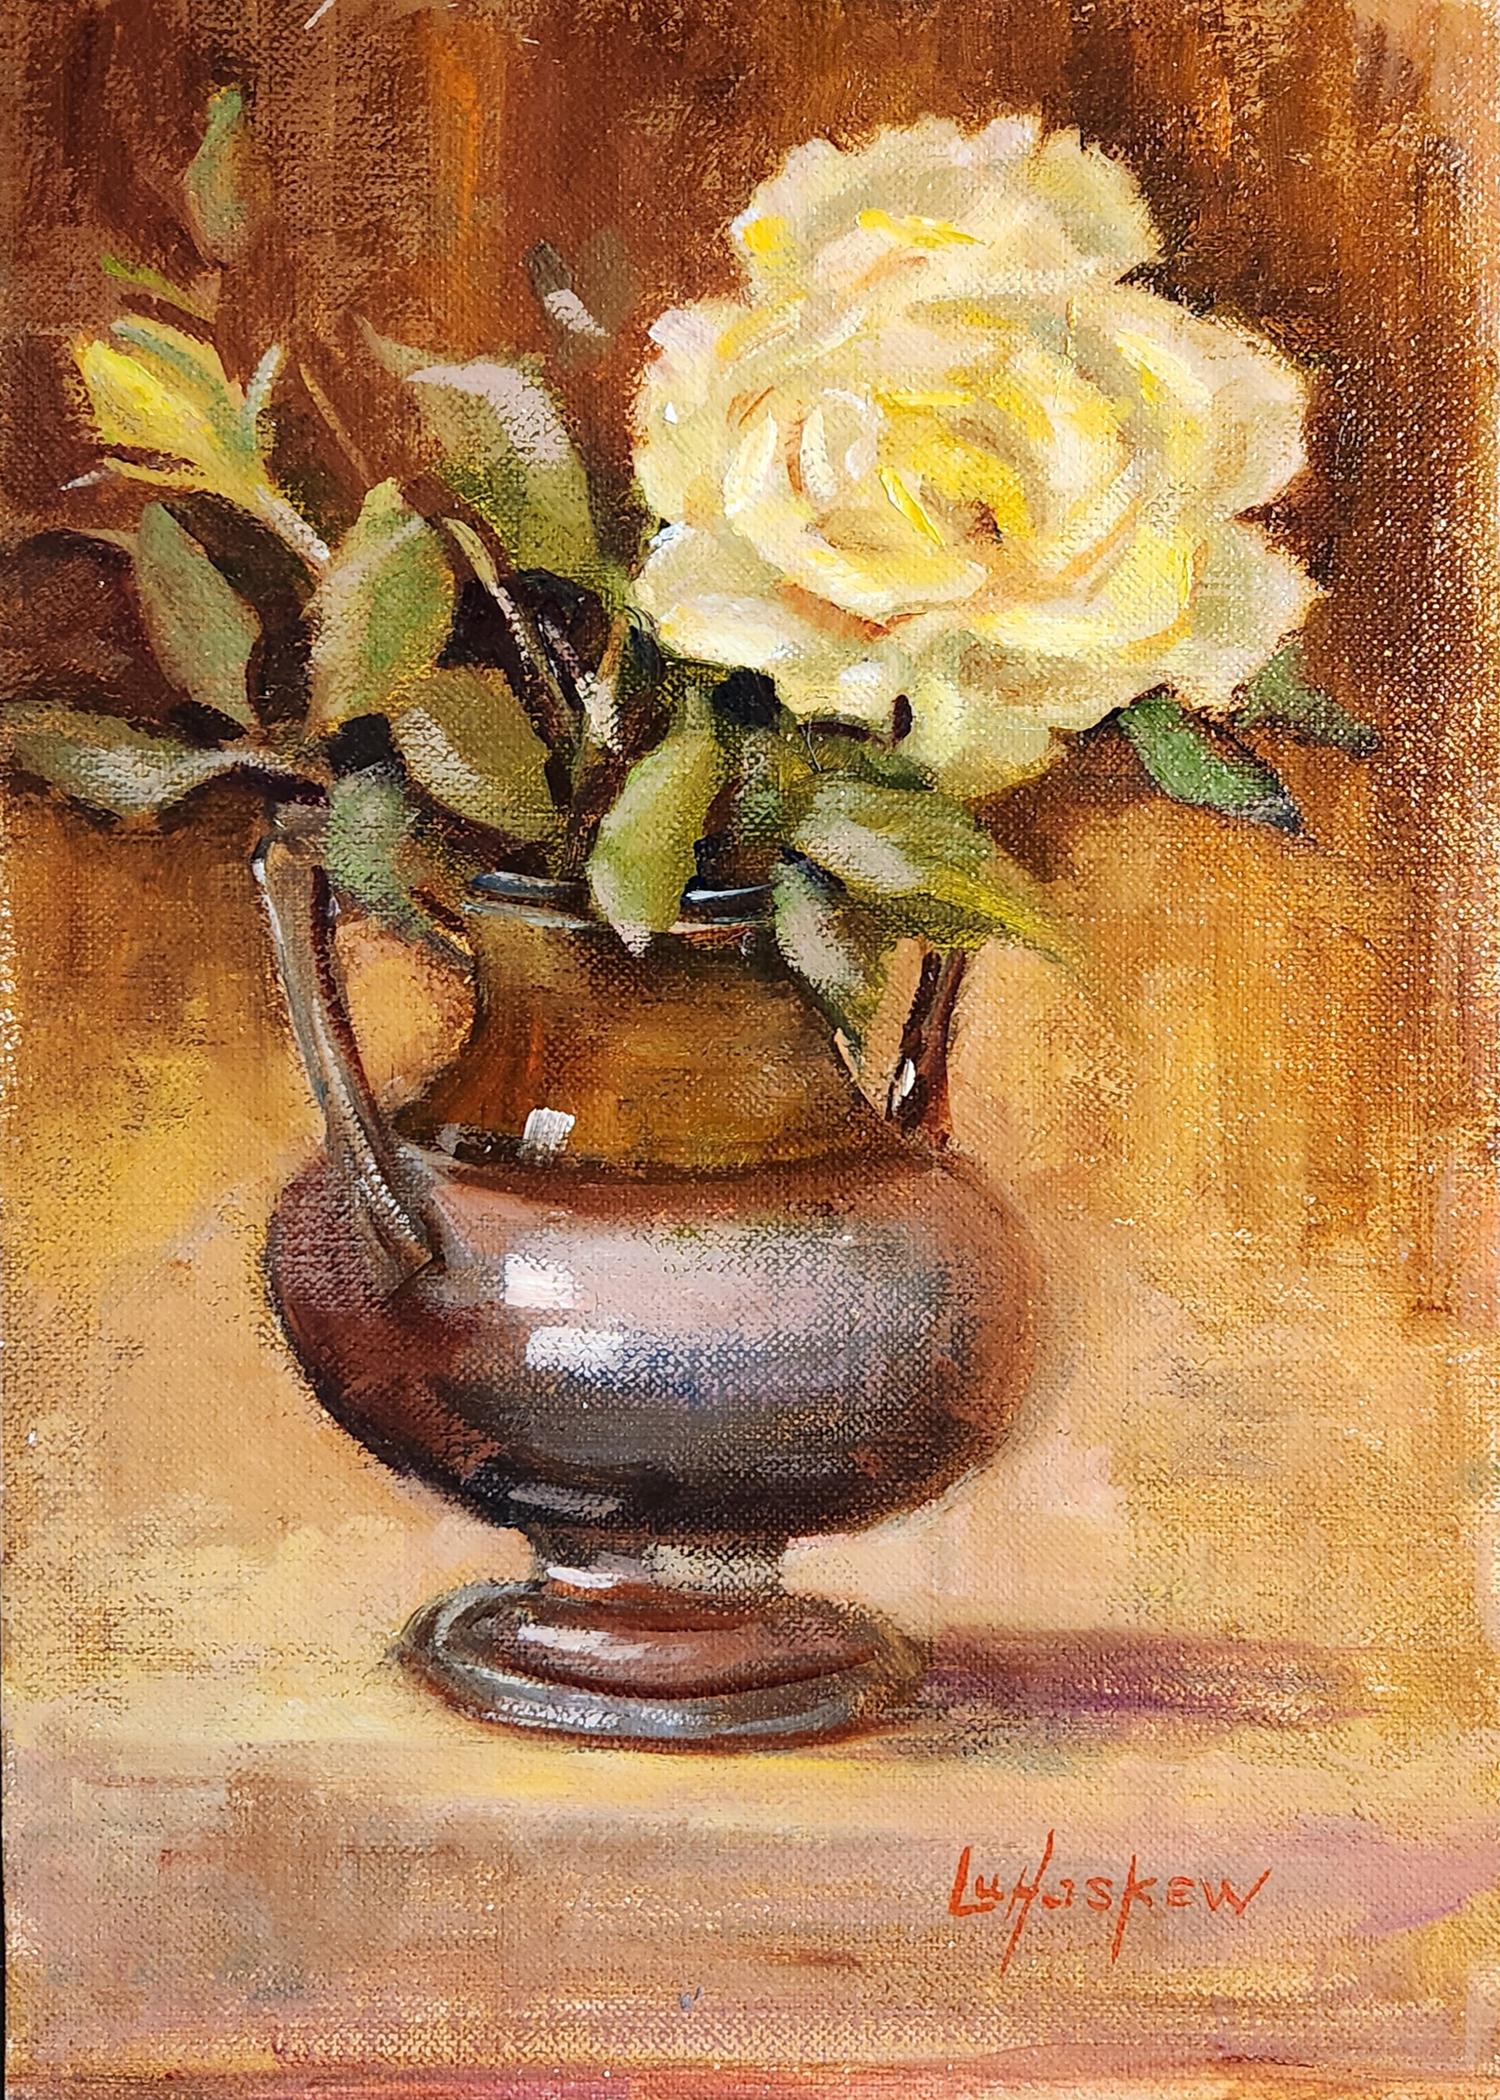 Yellow Rose, 12x8" oil on board - Painting by Lu Haskew